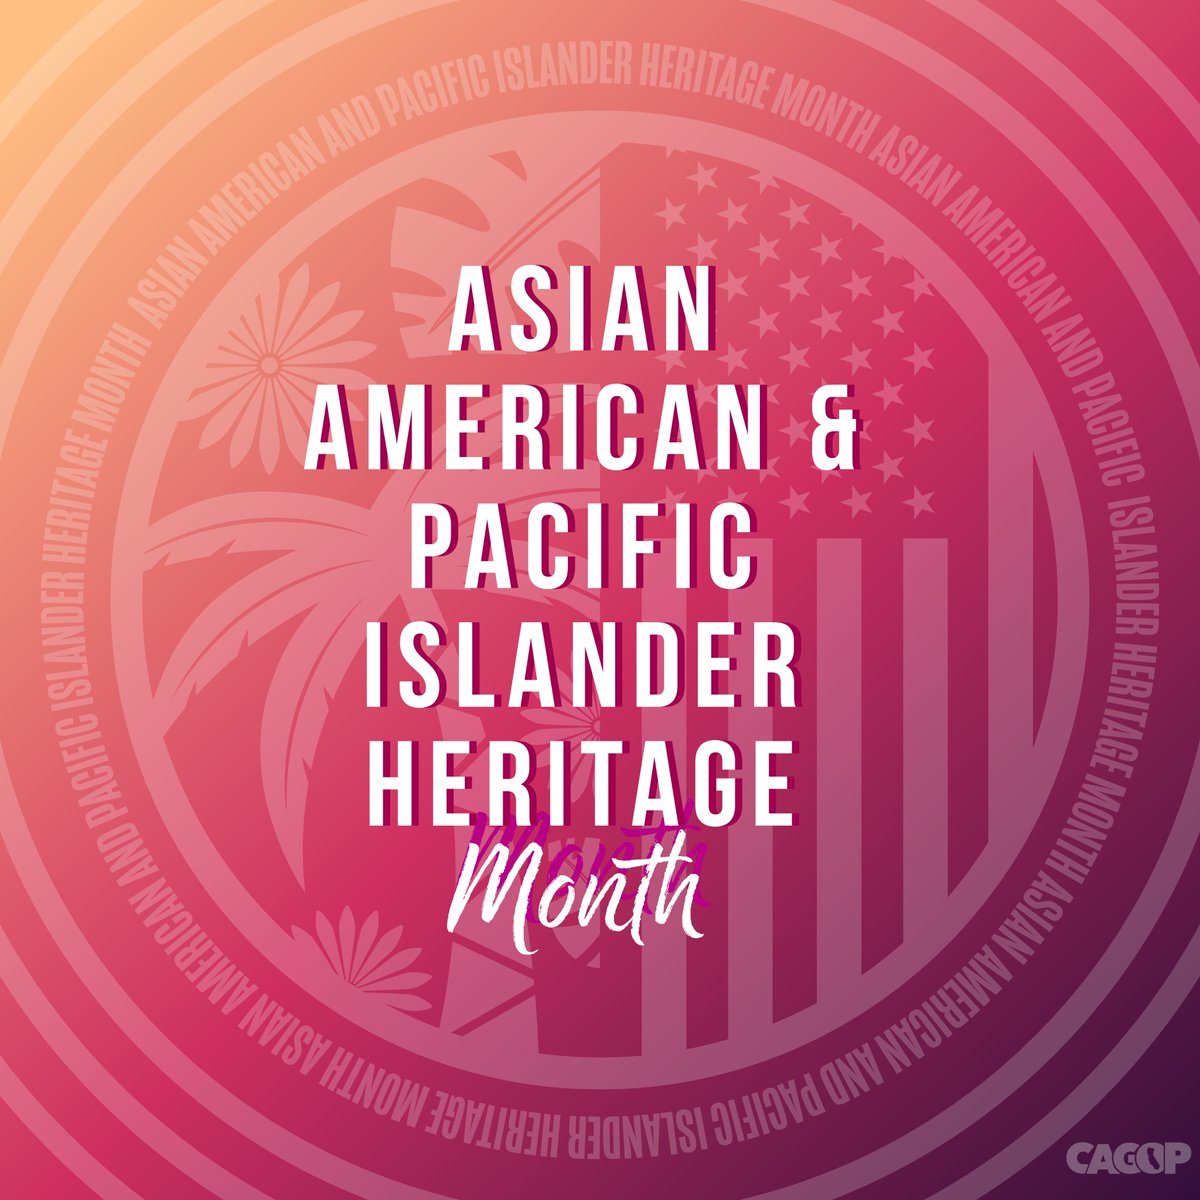 Today marks the start of Asian American and Pacific Islander Heritage Month when we celebrate the rich history and contributions made by so many in our nation.